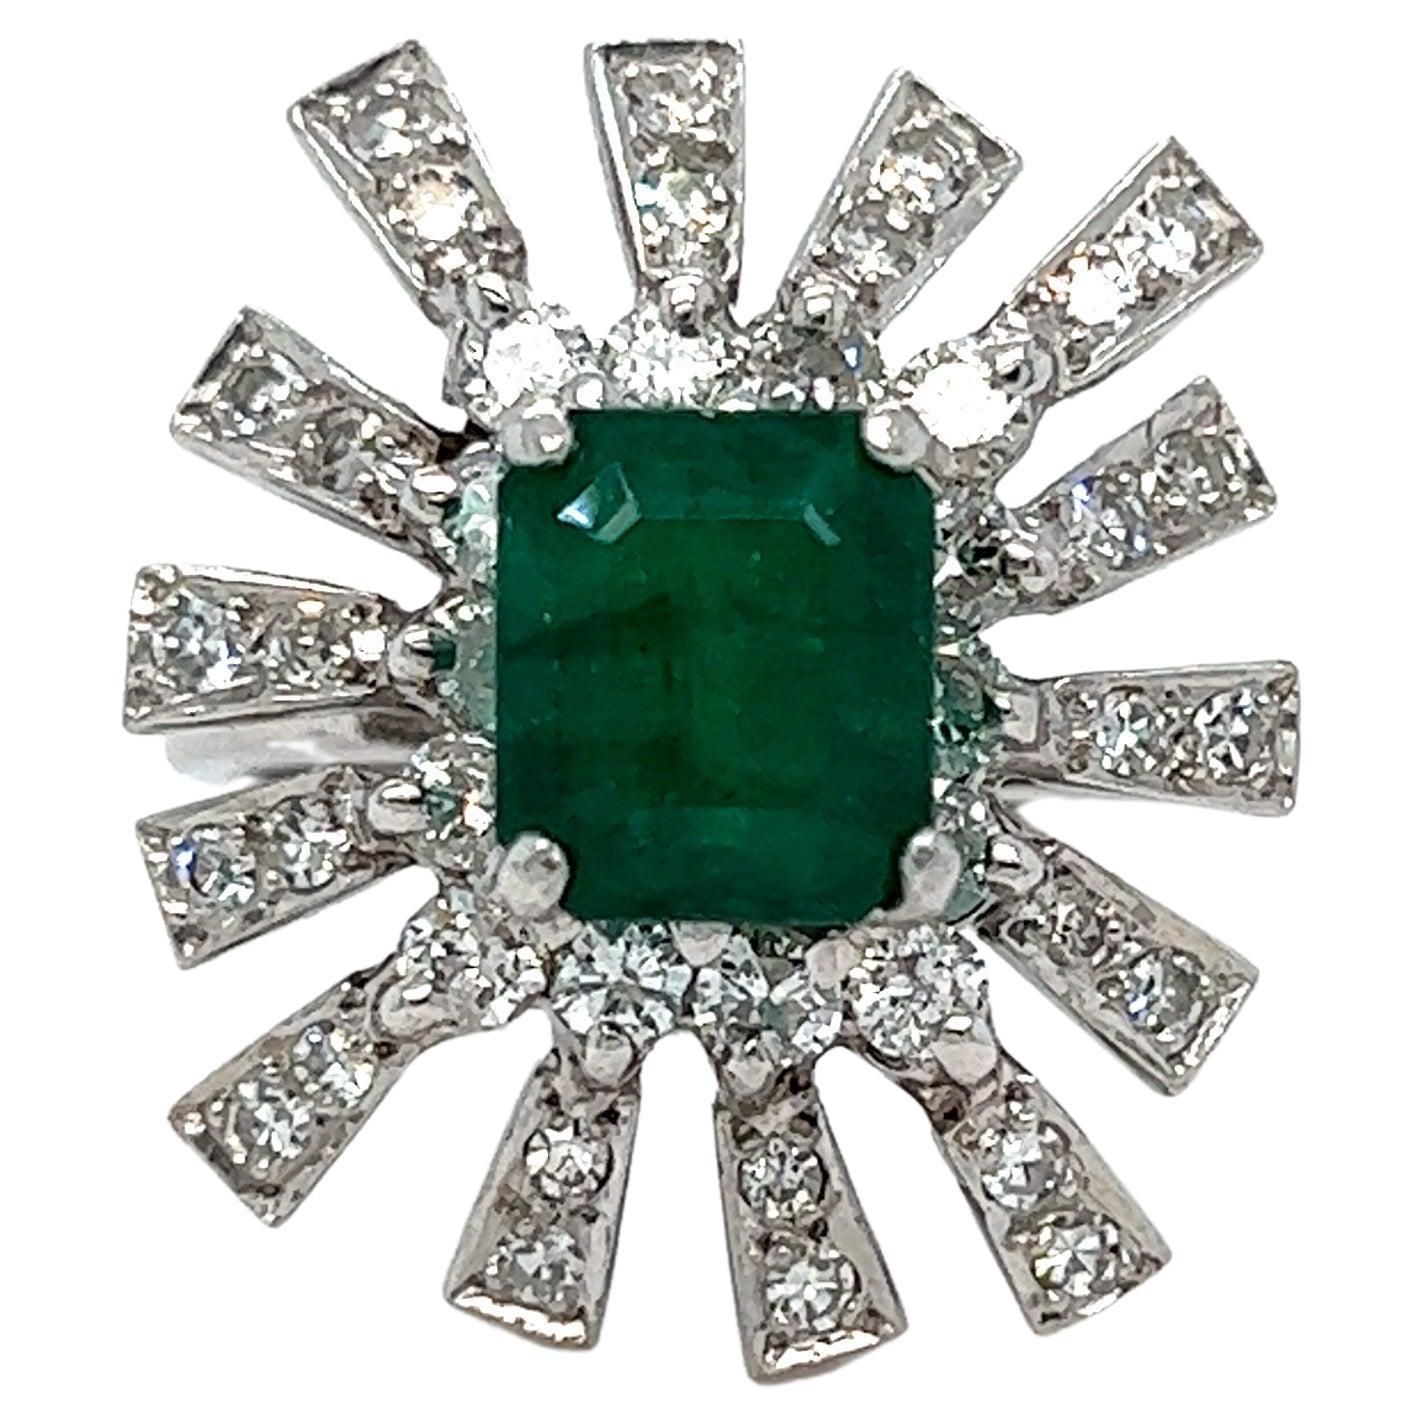 Retro Vintage 18K White Gold Diamond and Emerald Cluster Engagement Ring, 2.76ct